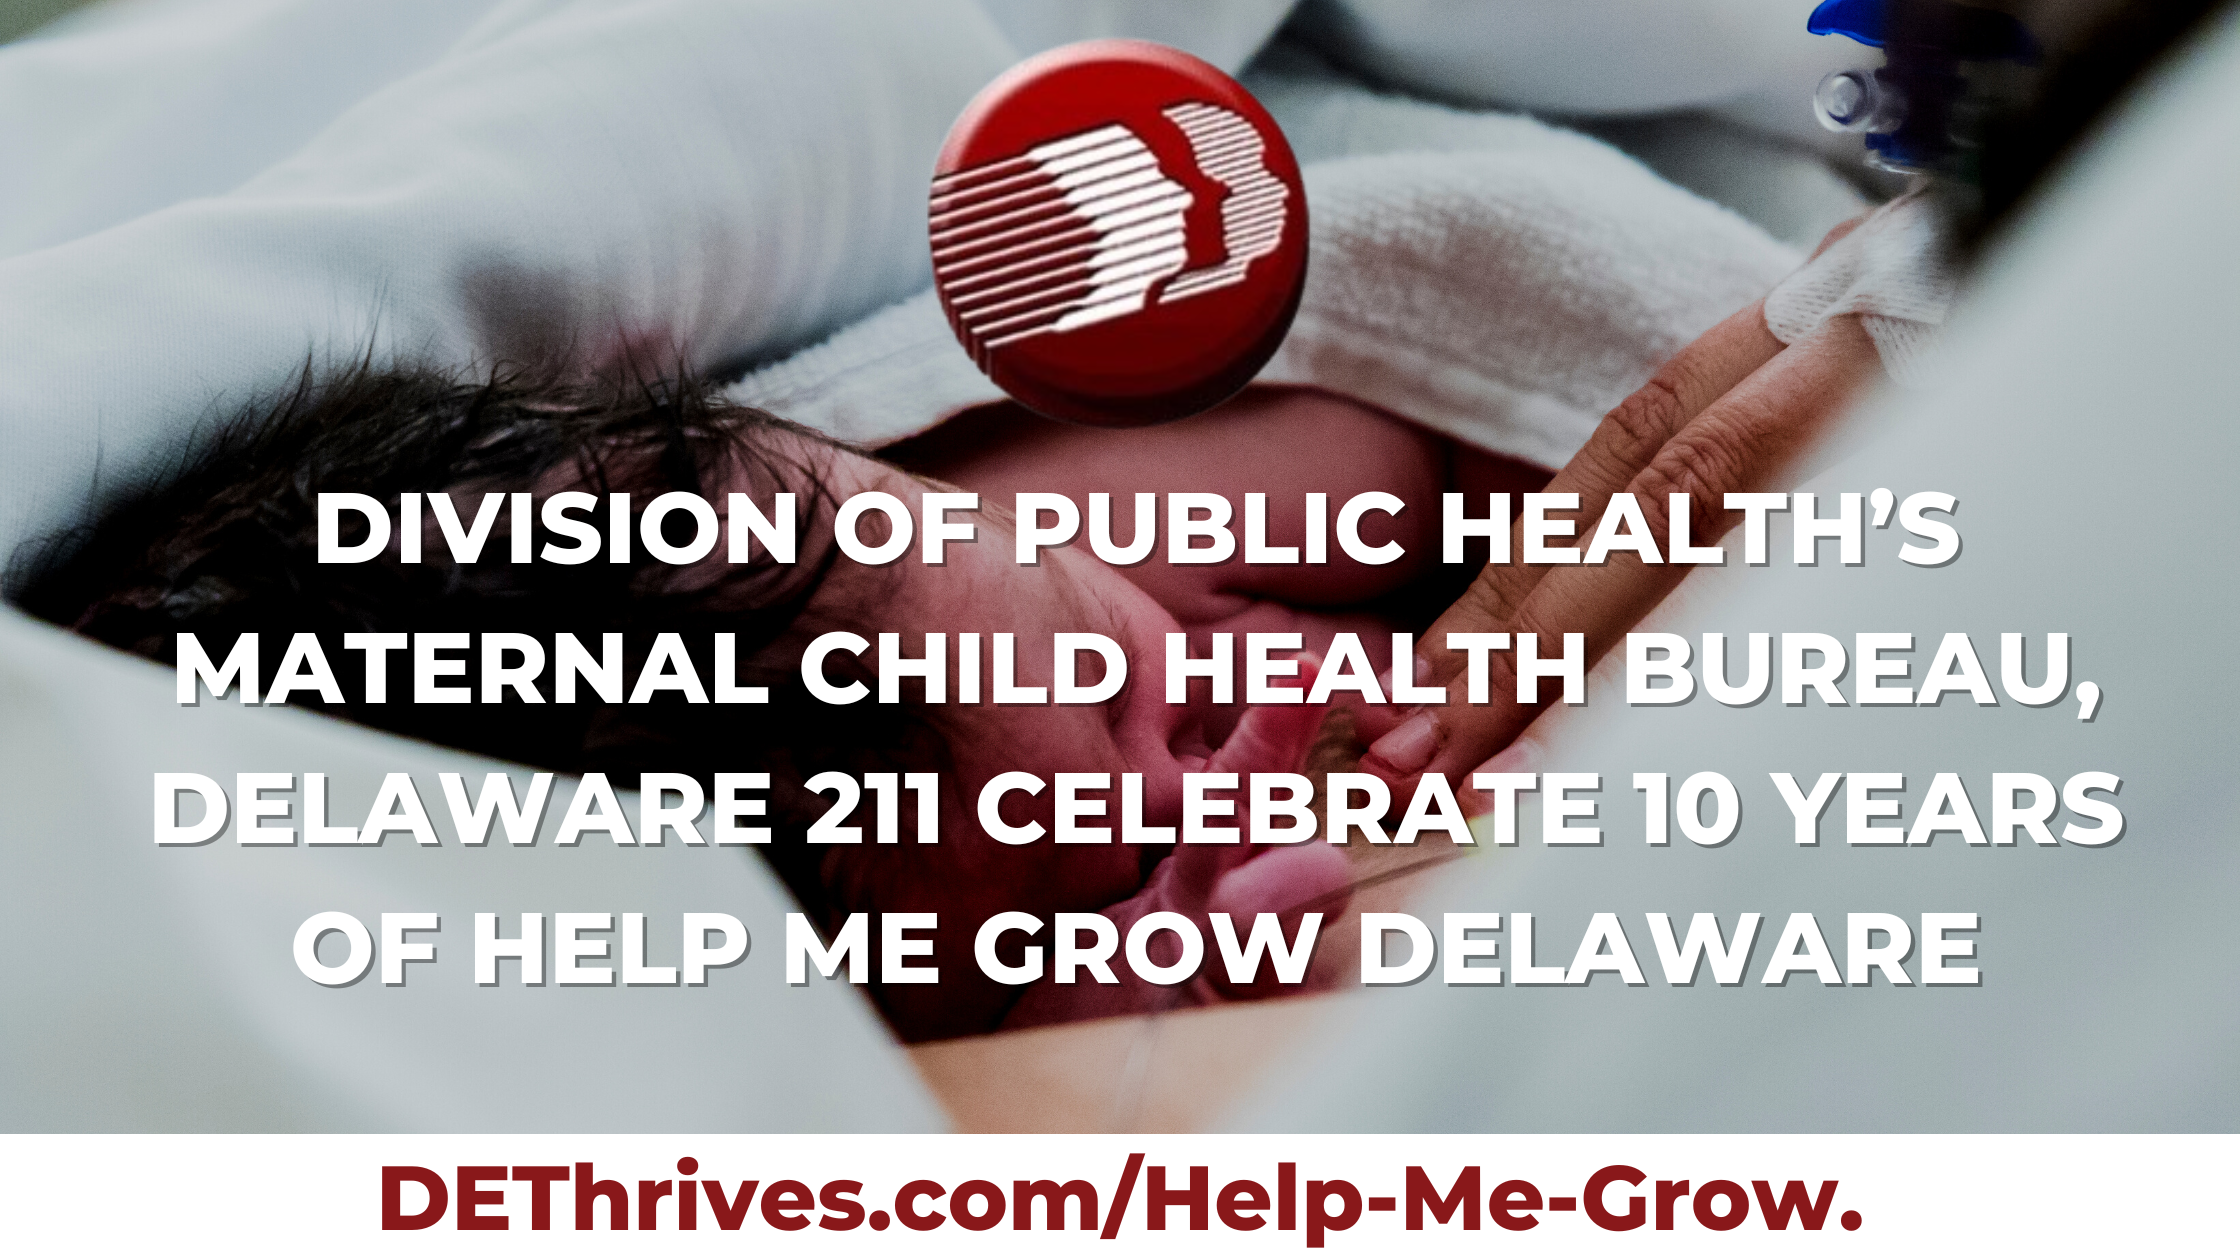 Division of Public Health’s Maternal Child Health Bureau, Delaware 2-1-1 Celebrate 10 Years of Help Me Grow Delaware